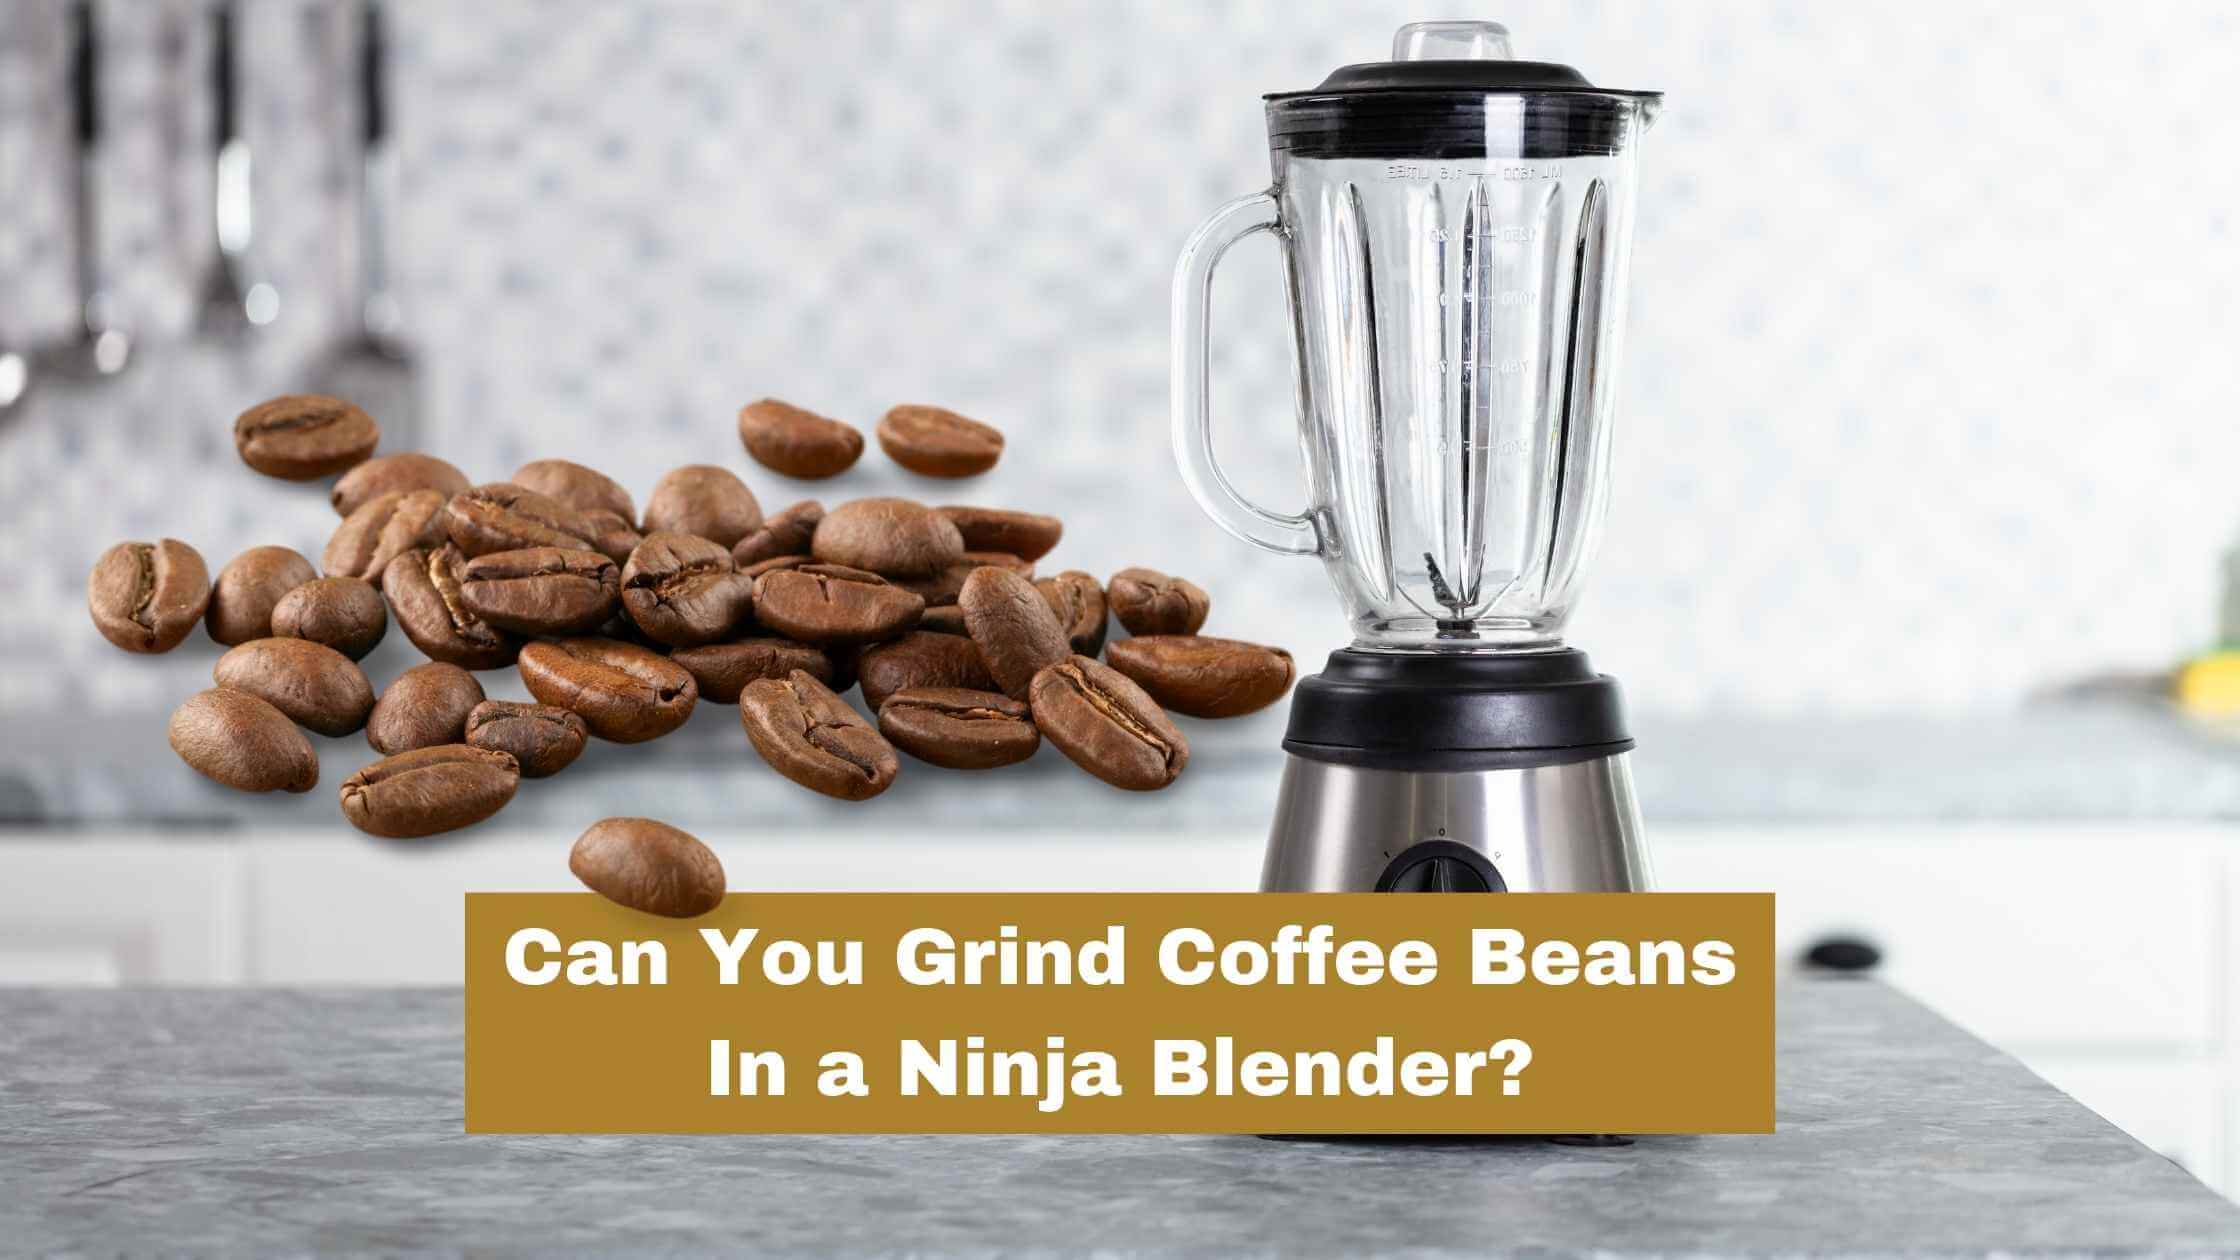 Can You Grind Coffee Beans with a Ninja Blender